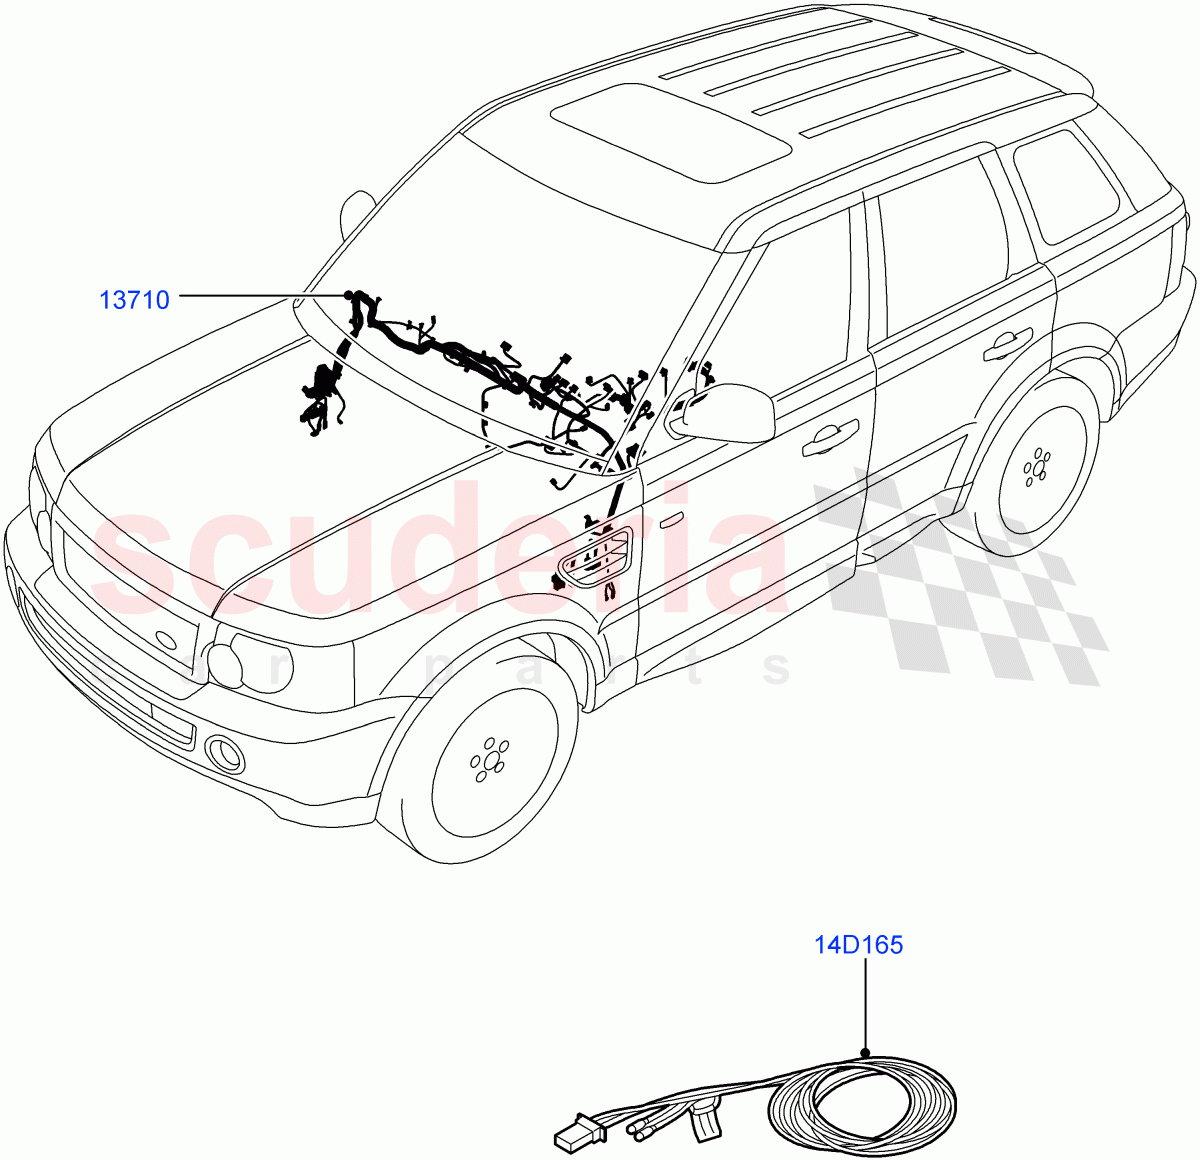 Electrical Wiring - Engine And Dash(Facia)((V)FROMAA000001) of Land Rover Land Rover Range Rover Sport (2010-2013) [3.6 V8 32V DOHC EFI Diesel]